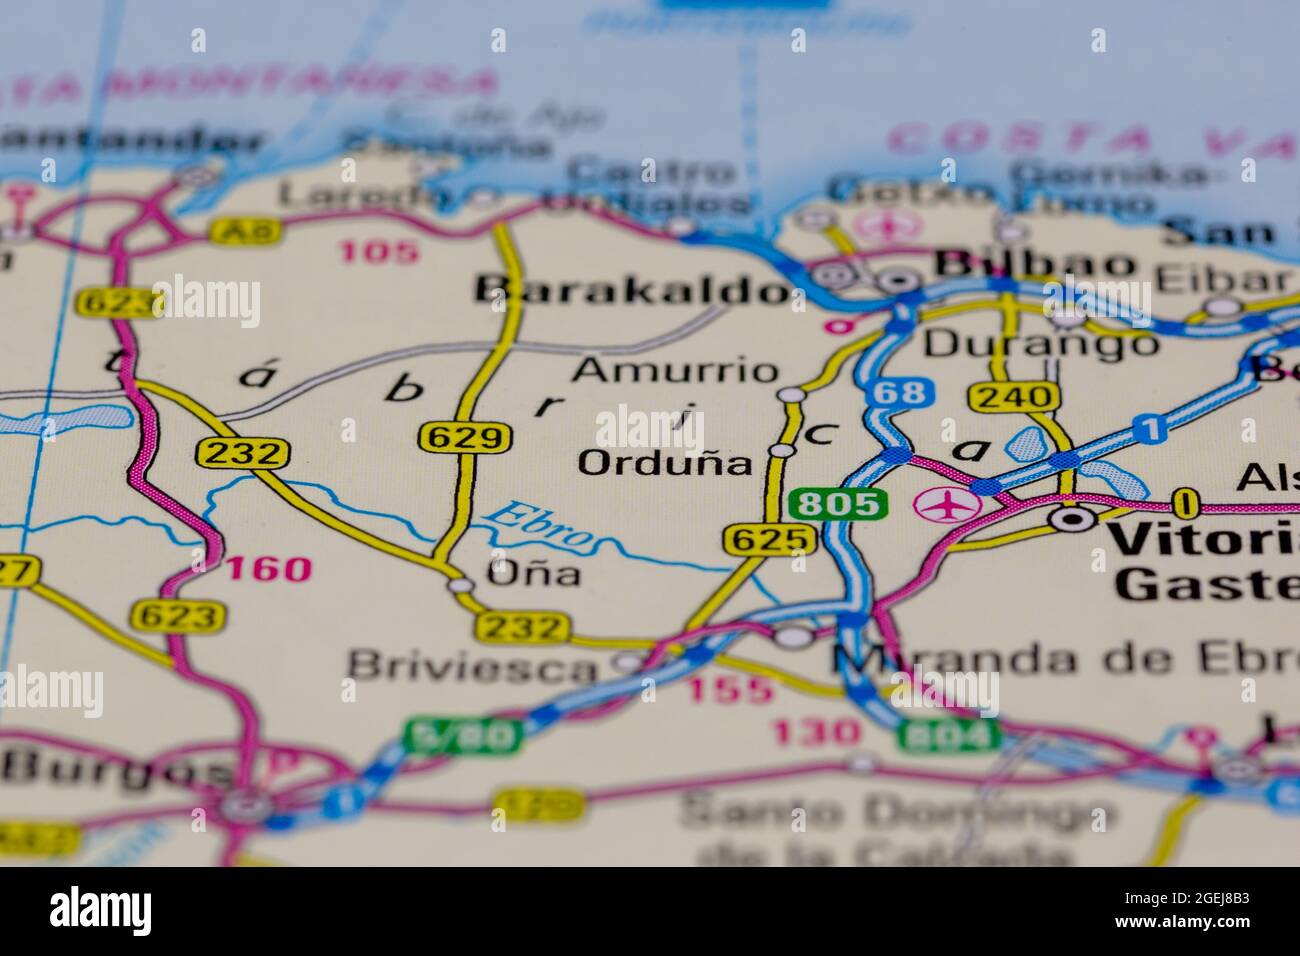 Orduna Spain shown on a road map or Geography map Stock Photo